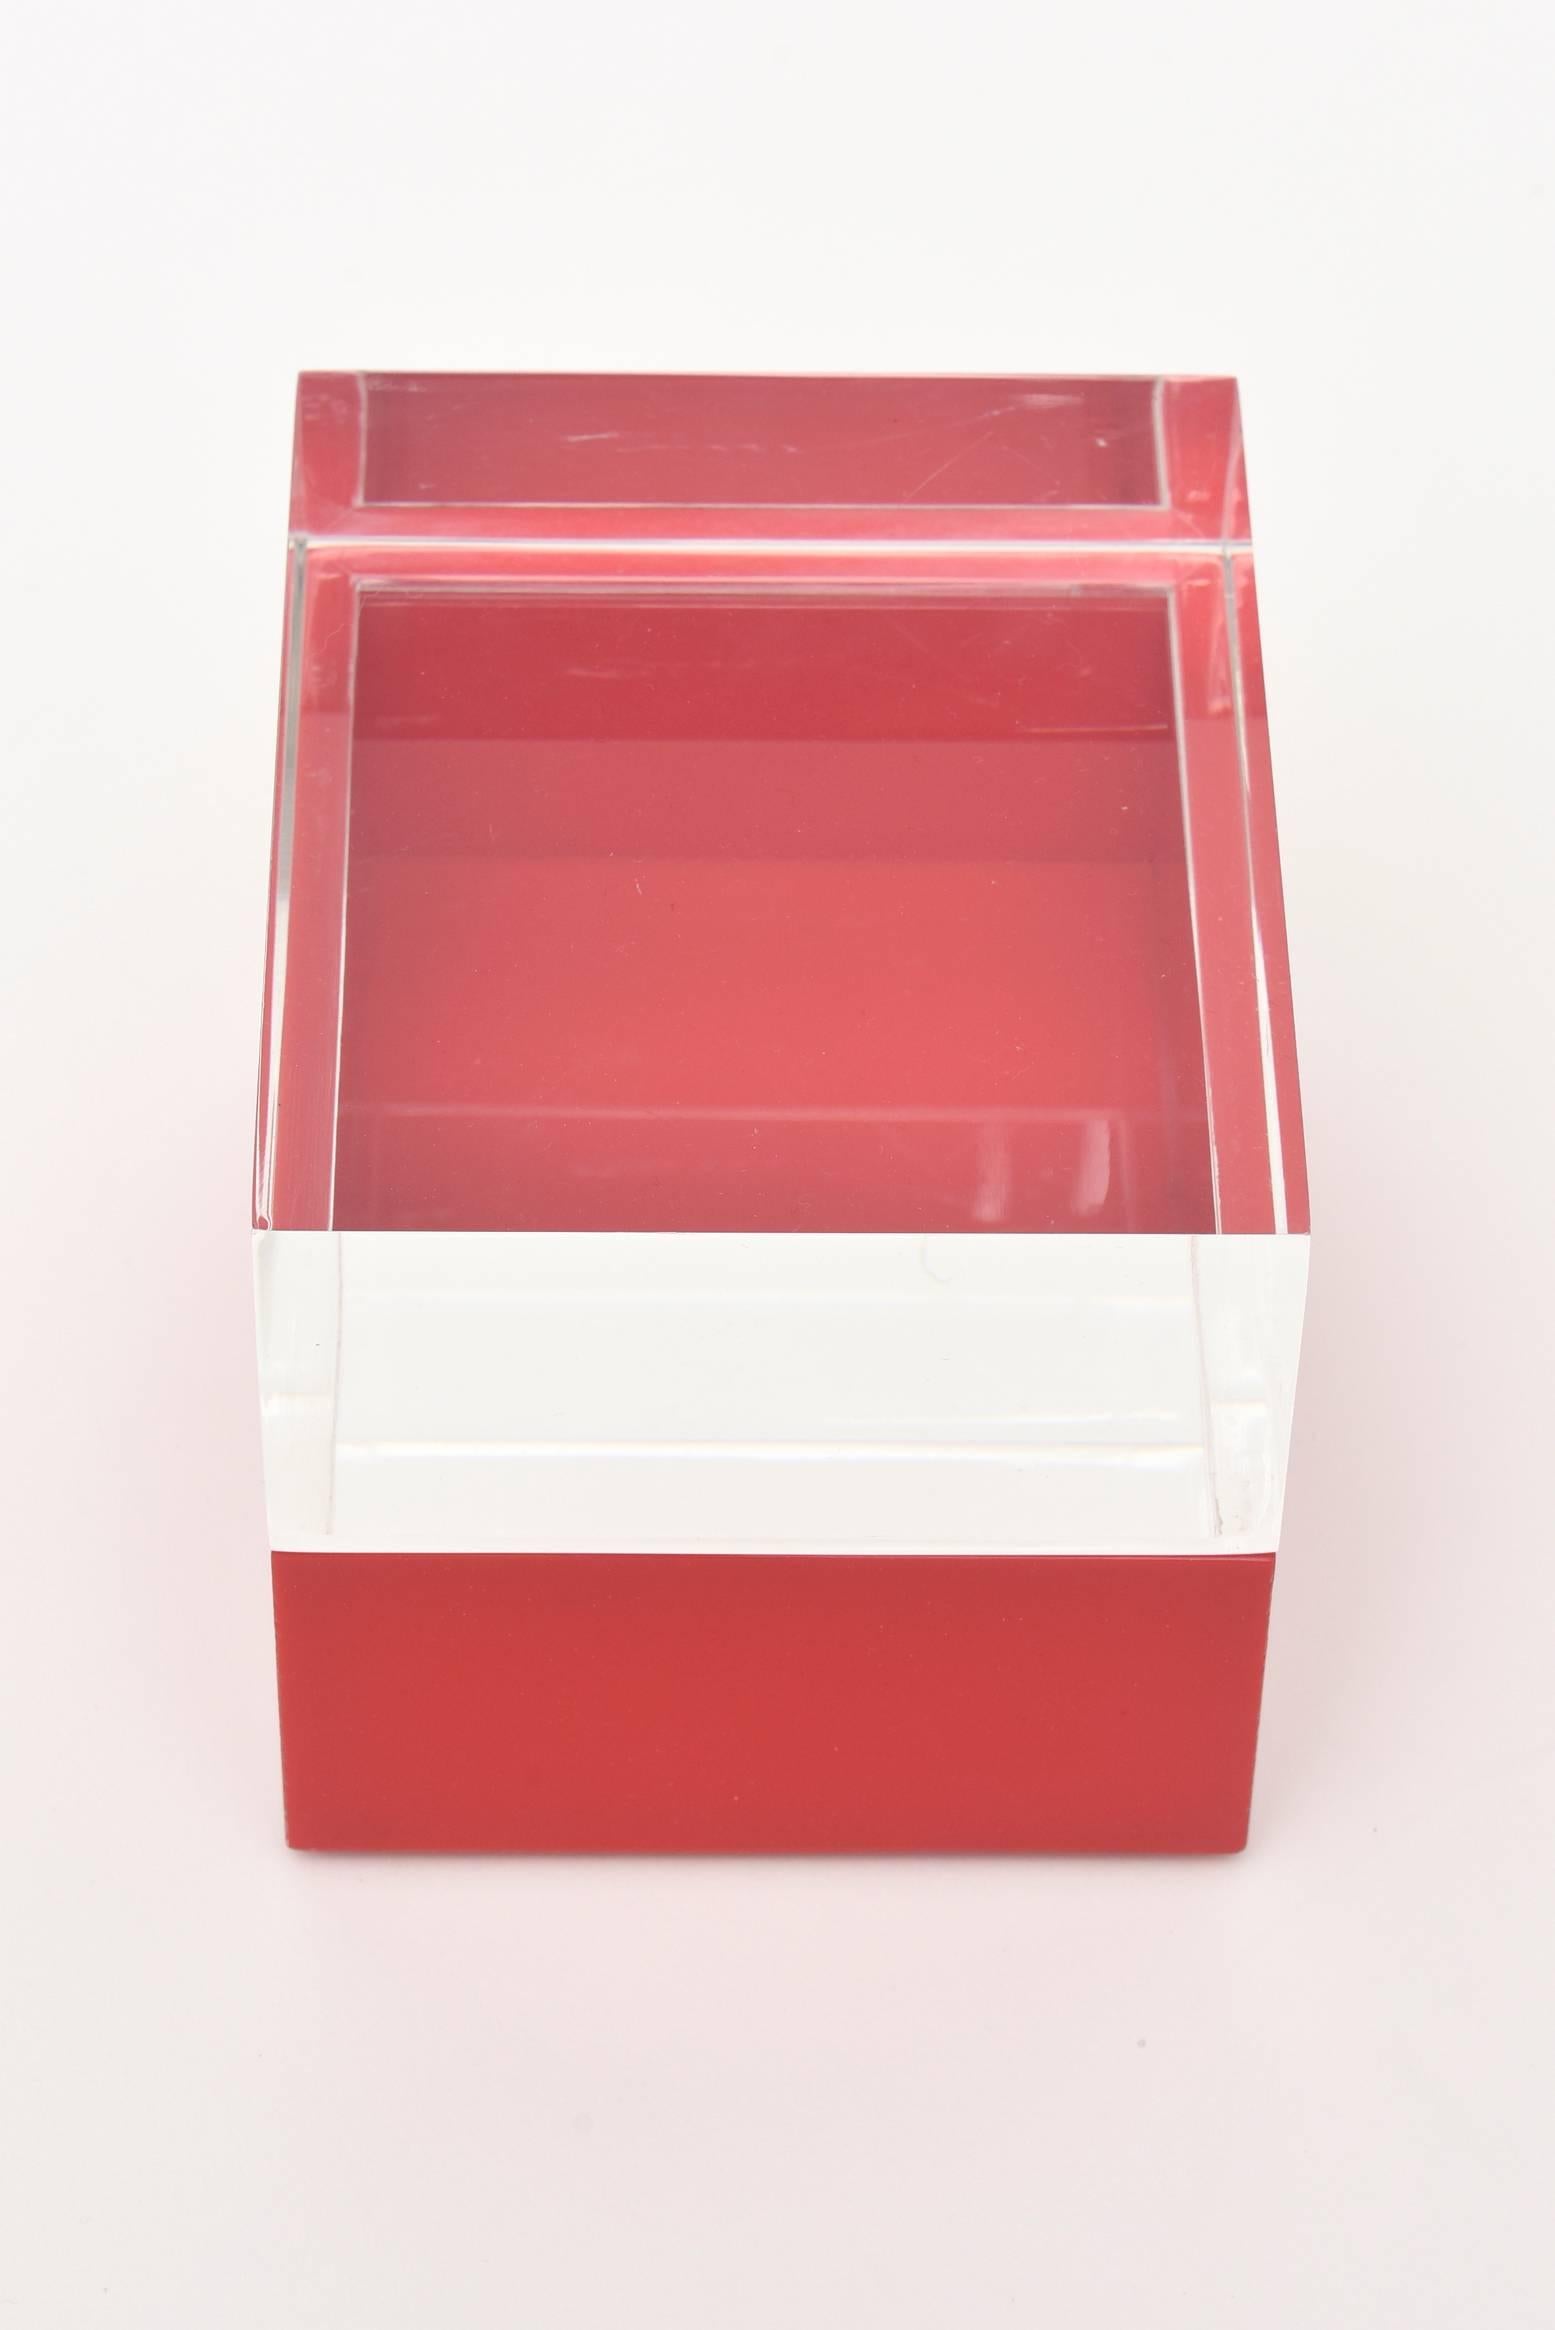 European Italian Two-Part Lucite Vintage Box /HOLIDAY SATURDAY SALE